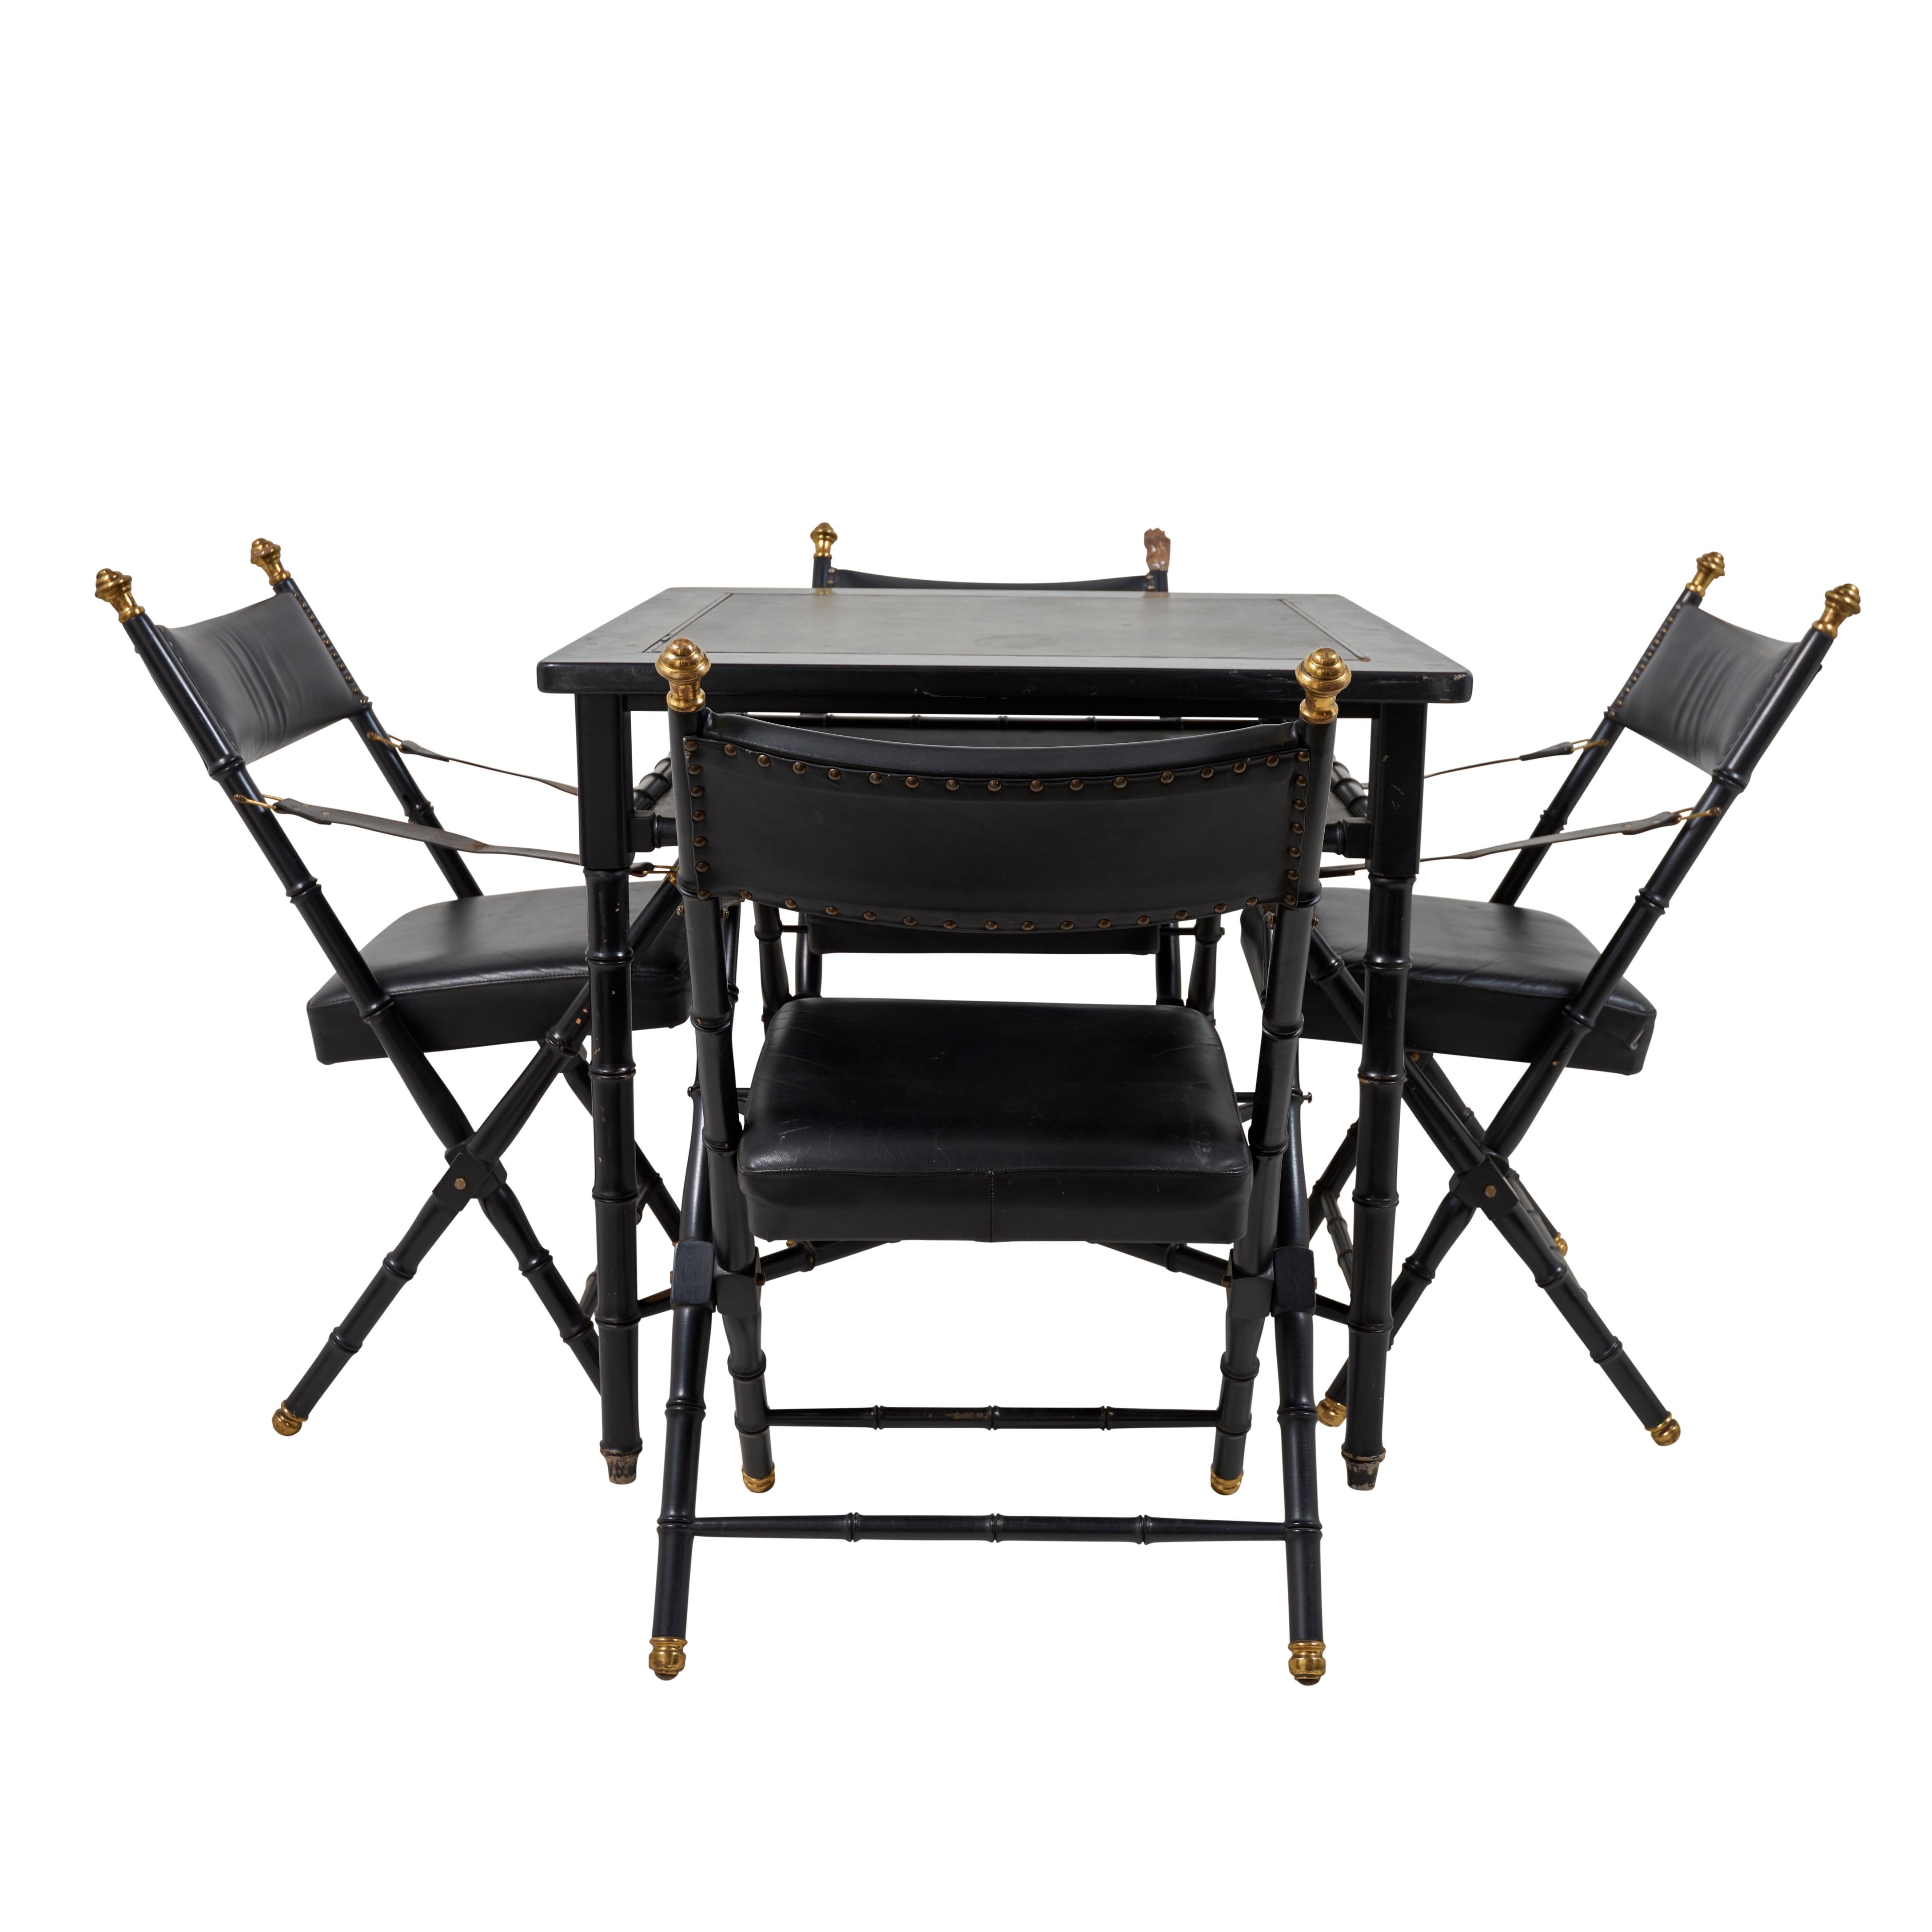 This listing includes four faux bamboo & leather campaign chairs and a game table. The chairs include brass detailing, and the game table has a reversable felt/leather top.

Since Schumacher was founded in 1889, our family-owned company has been